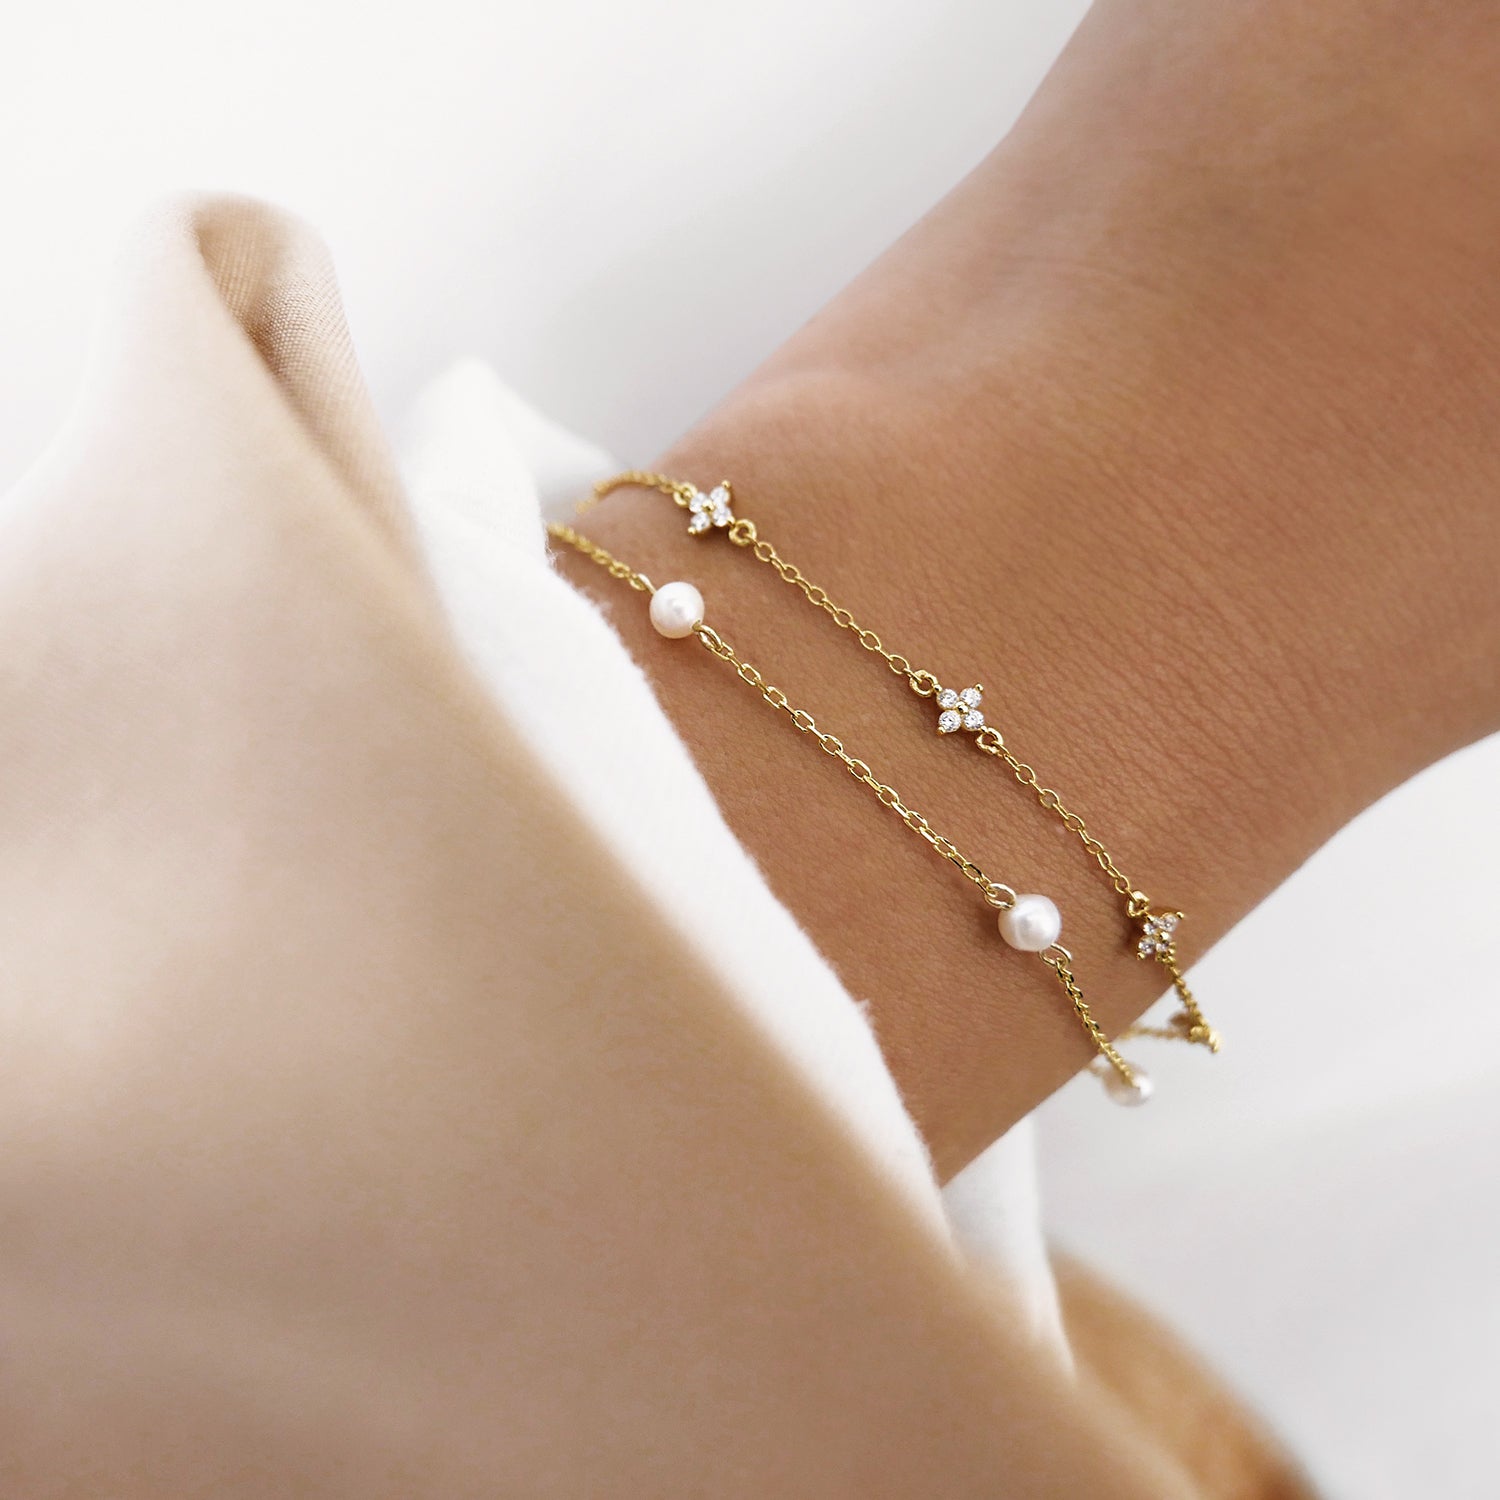 Iris gold bracelet with white zirconia clovers styled with pearl chain